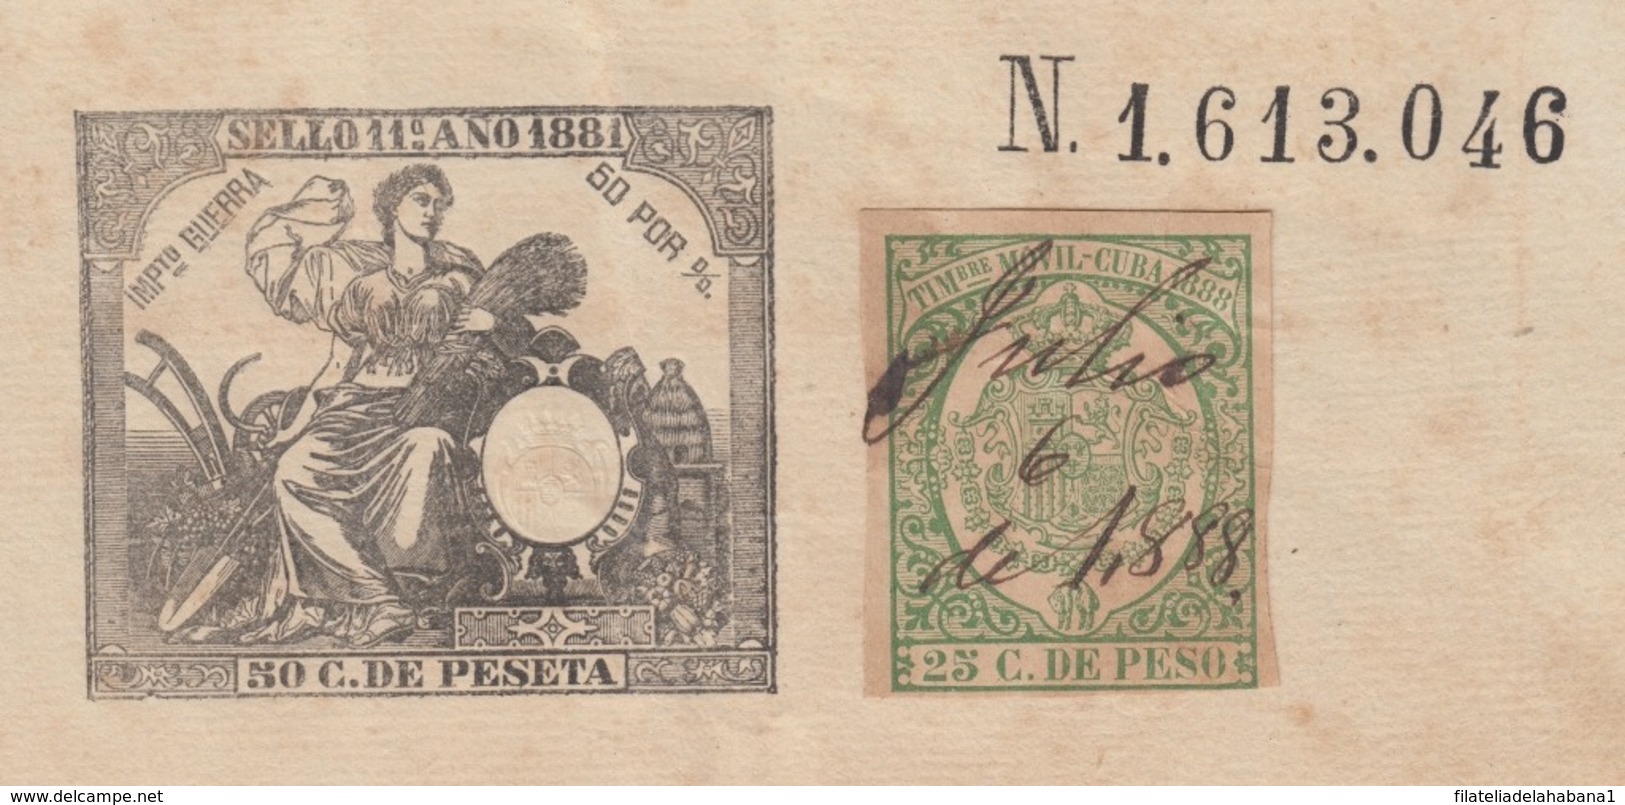 TMO-51 CUBA (LG1515) SPAIN ANT. REVENUE 1881 SEALLED PAPER + TIMBRE MOVIL 1886. - Timbres-taxe